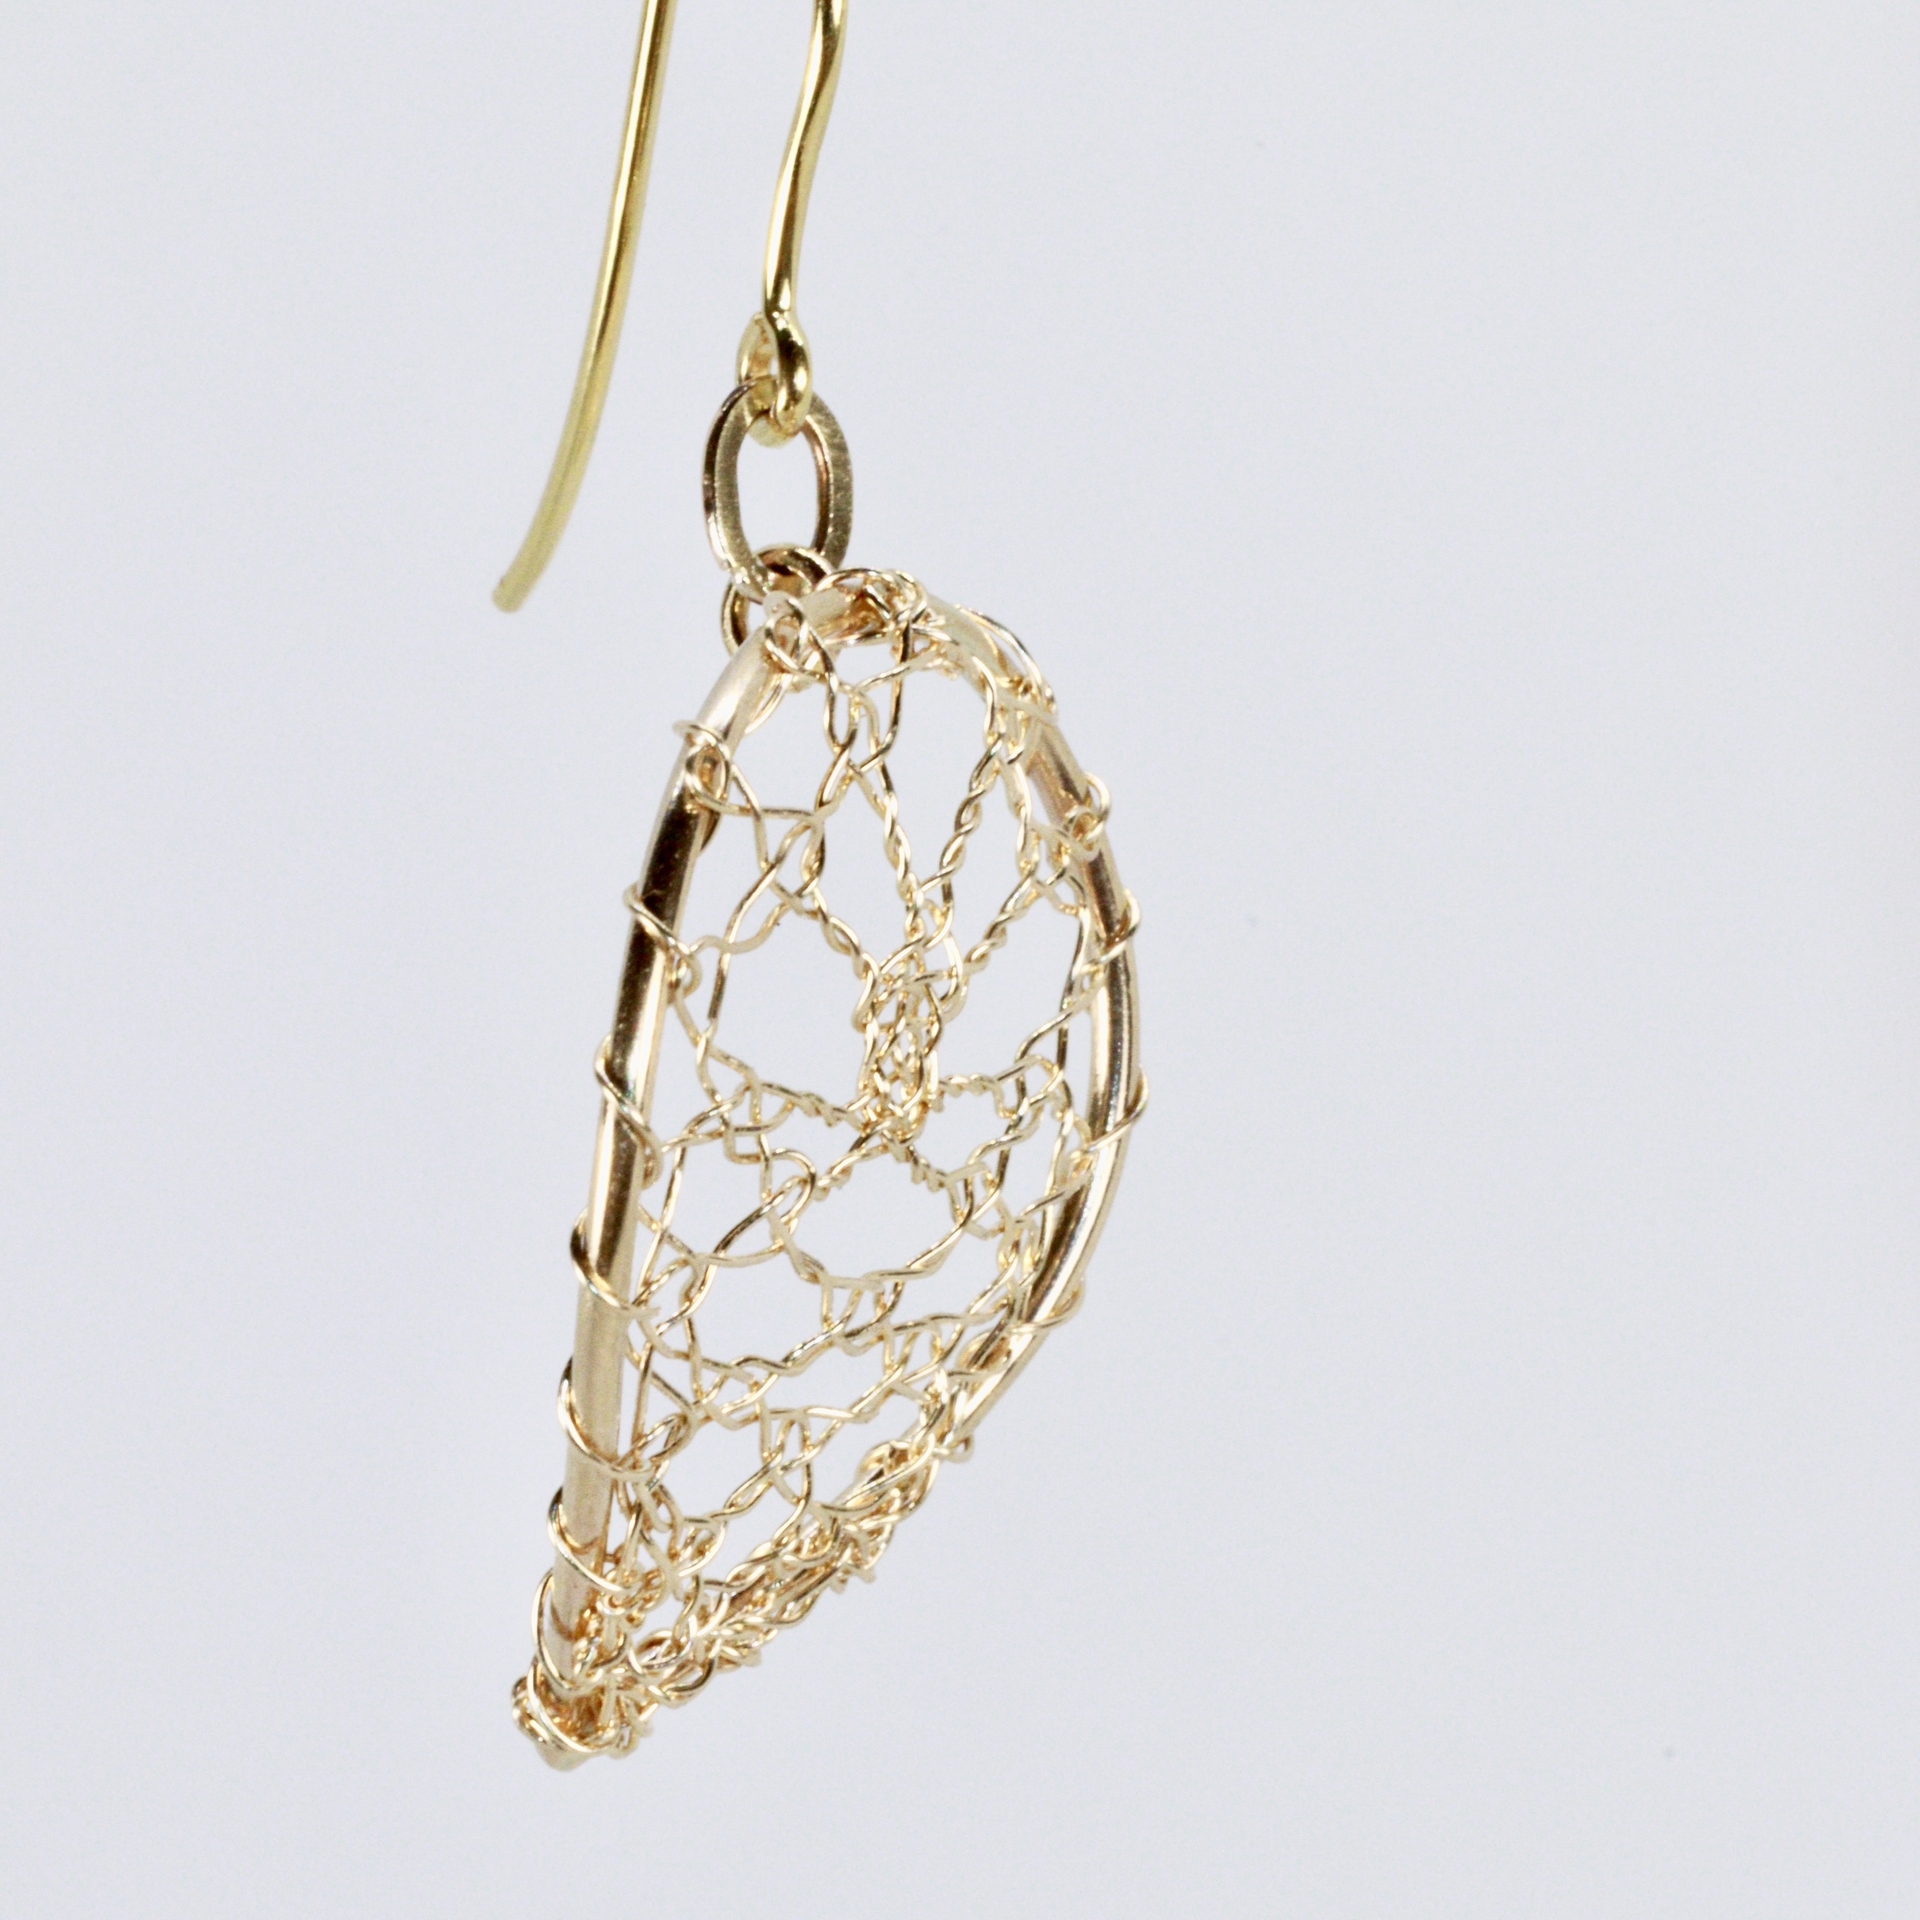 9ct Torchon Lace Falling Leaves Earrings